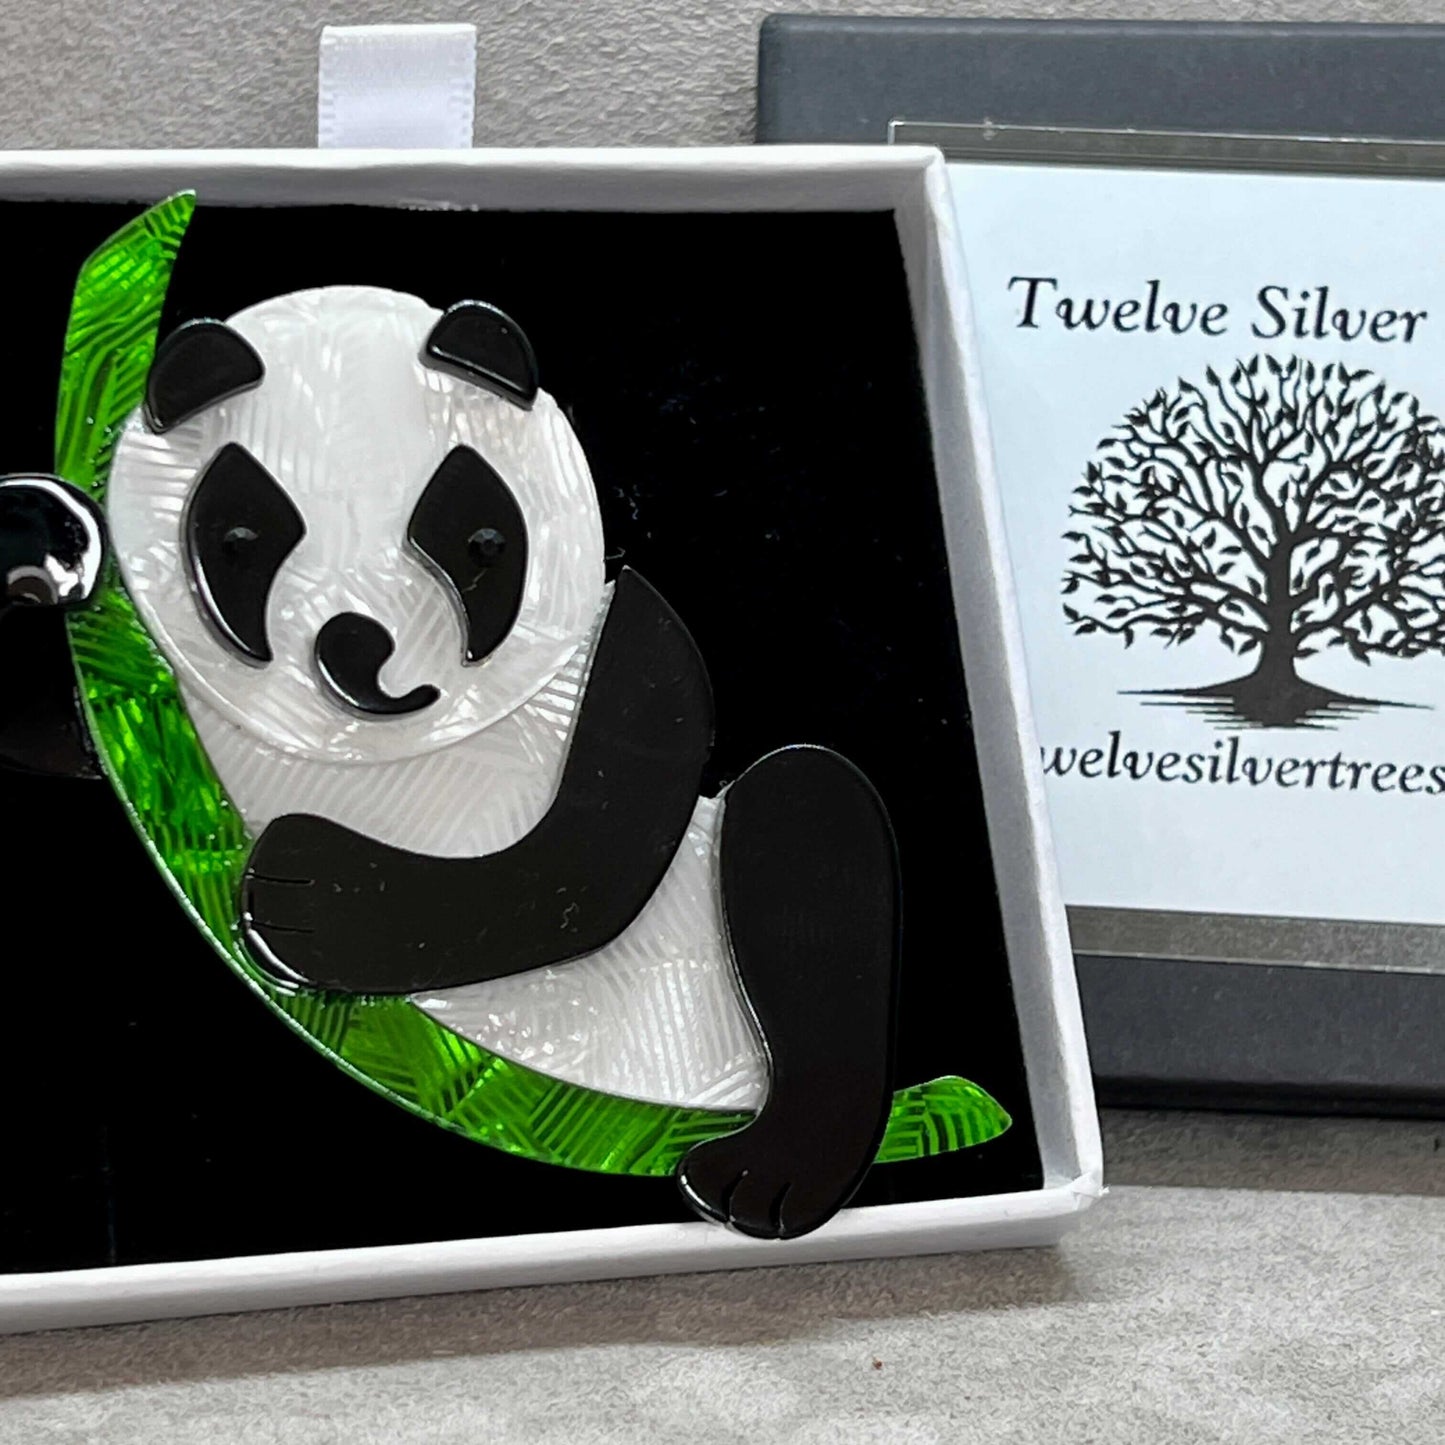 Handmade Acrylic Art Brooch -  The Chilled Out Panda - Twelve Silver Trees